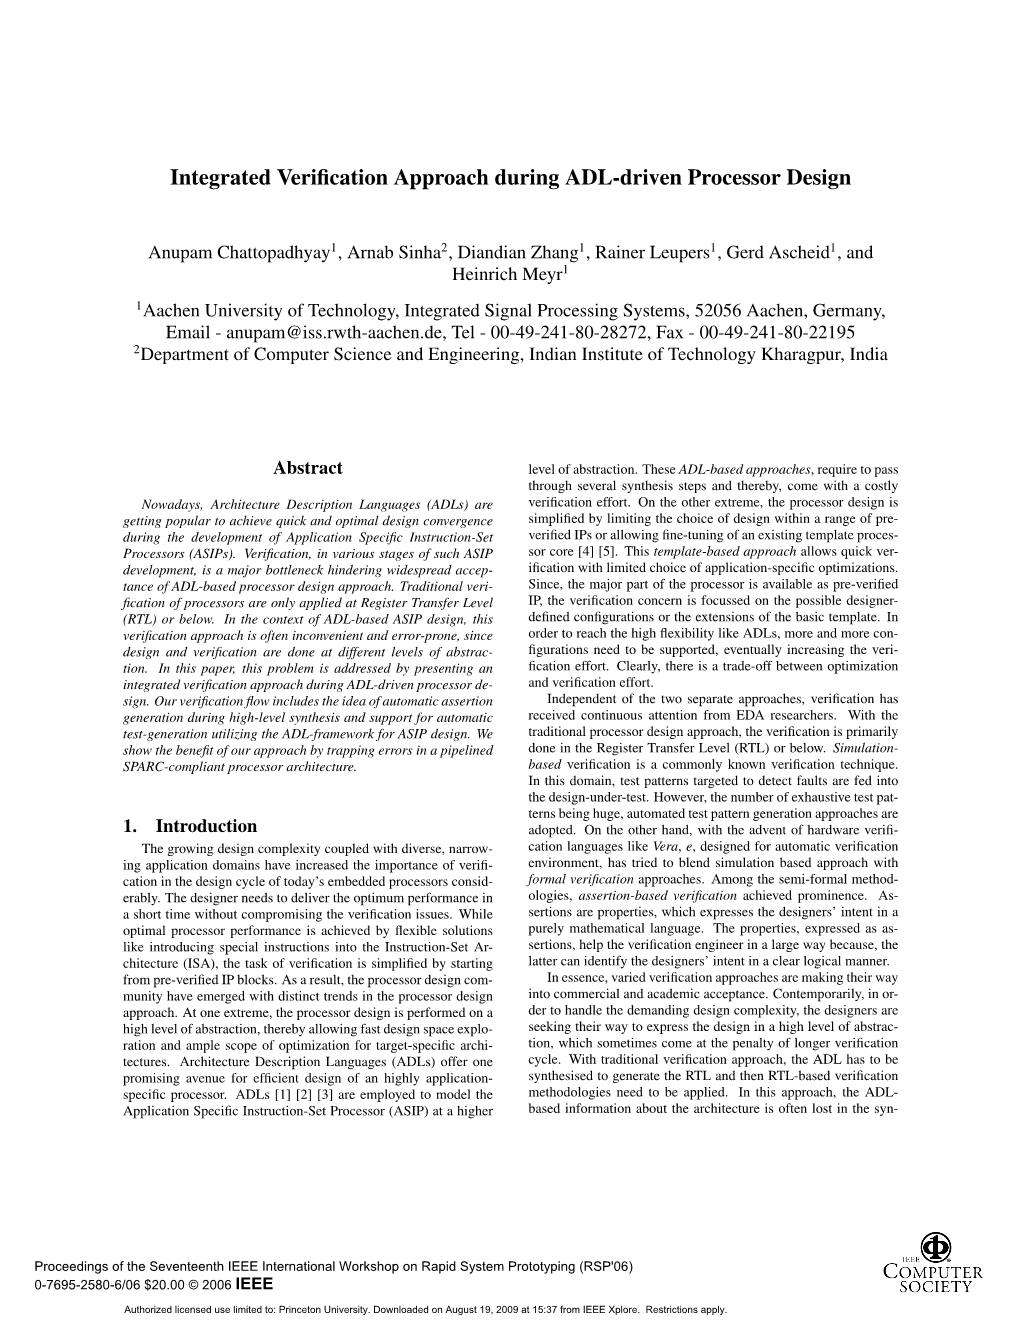 Integrated Verification Approach During ADL-Driven Processor Design